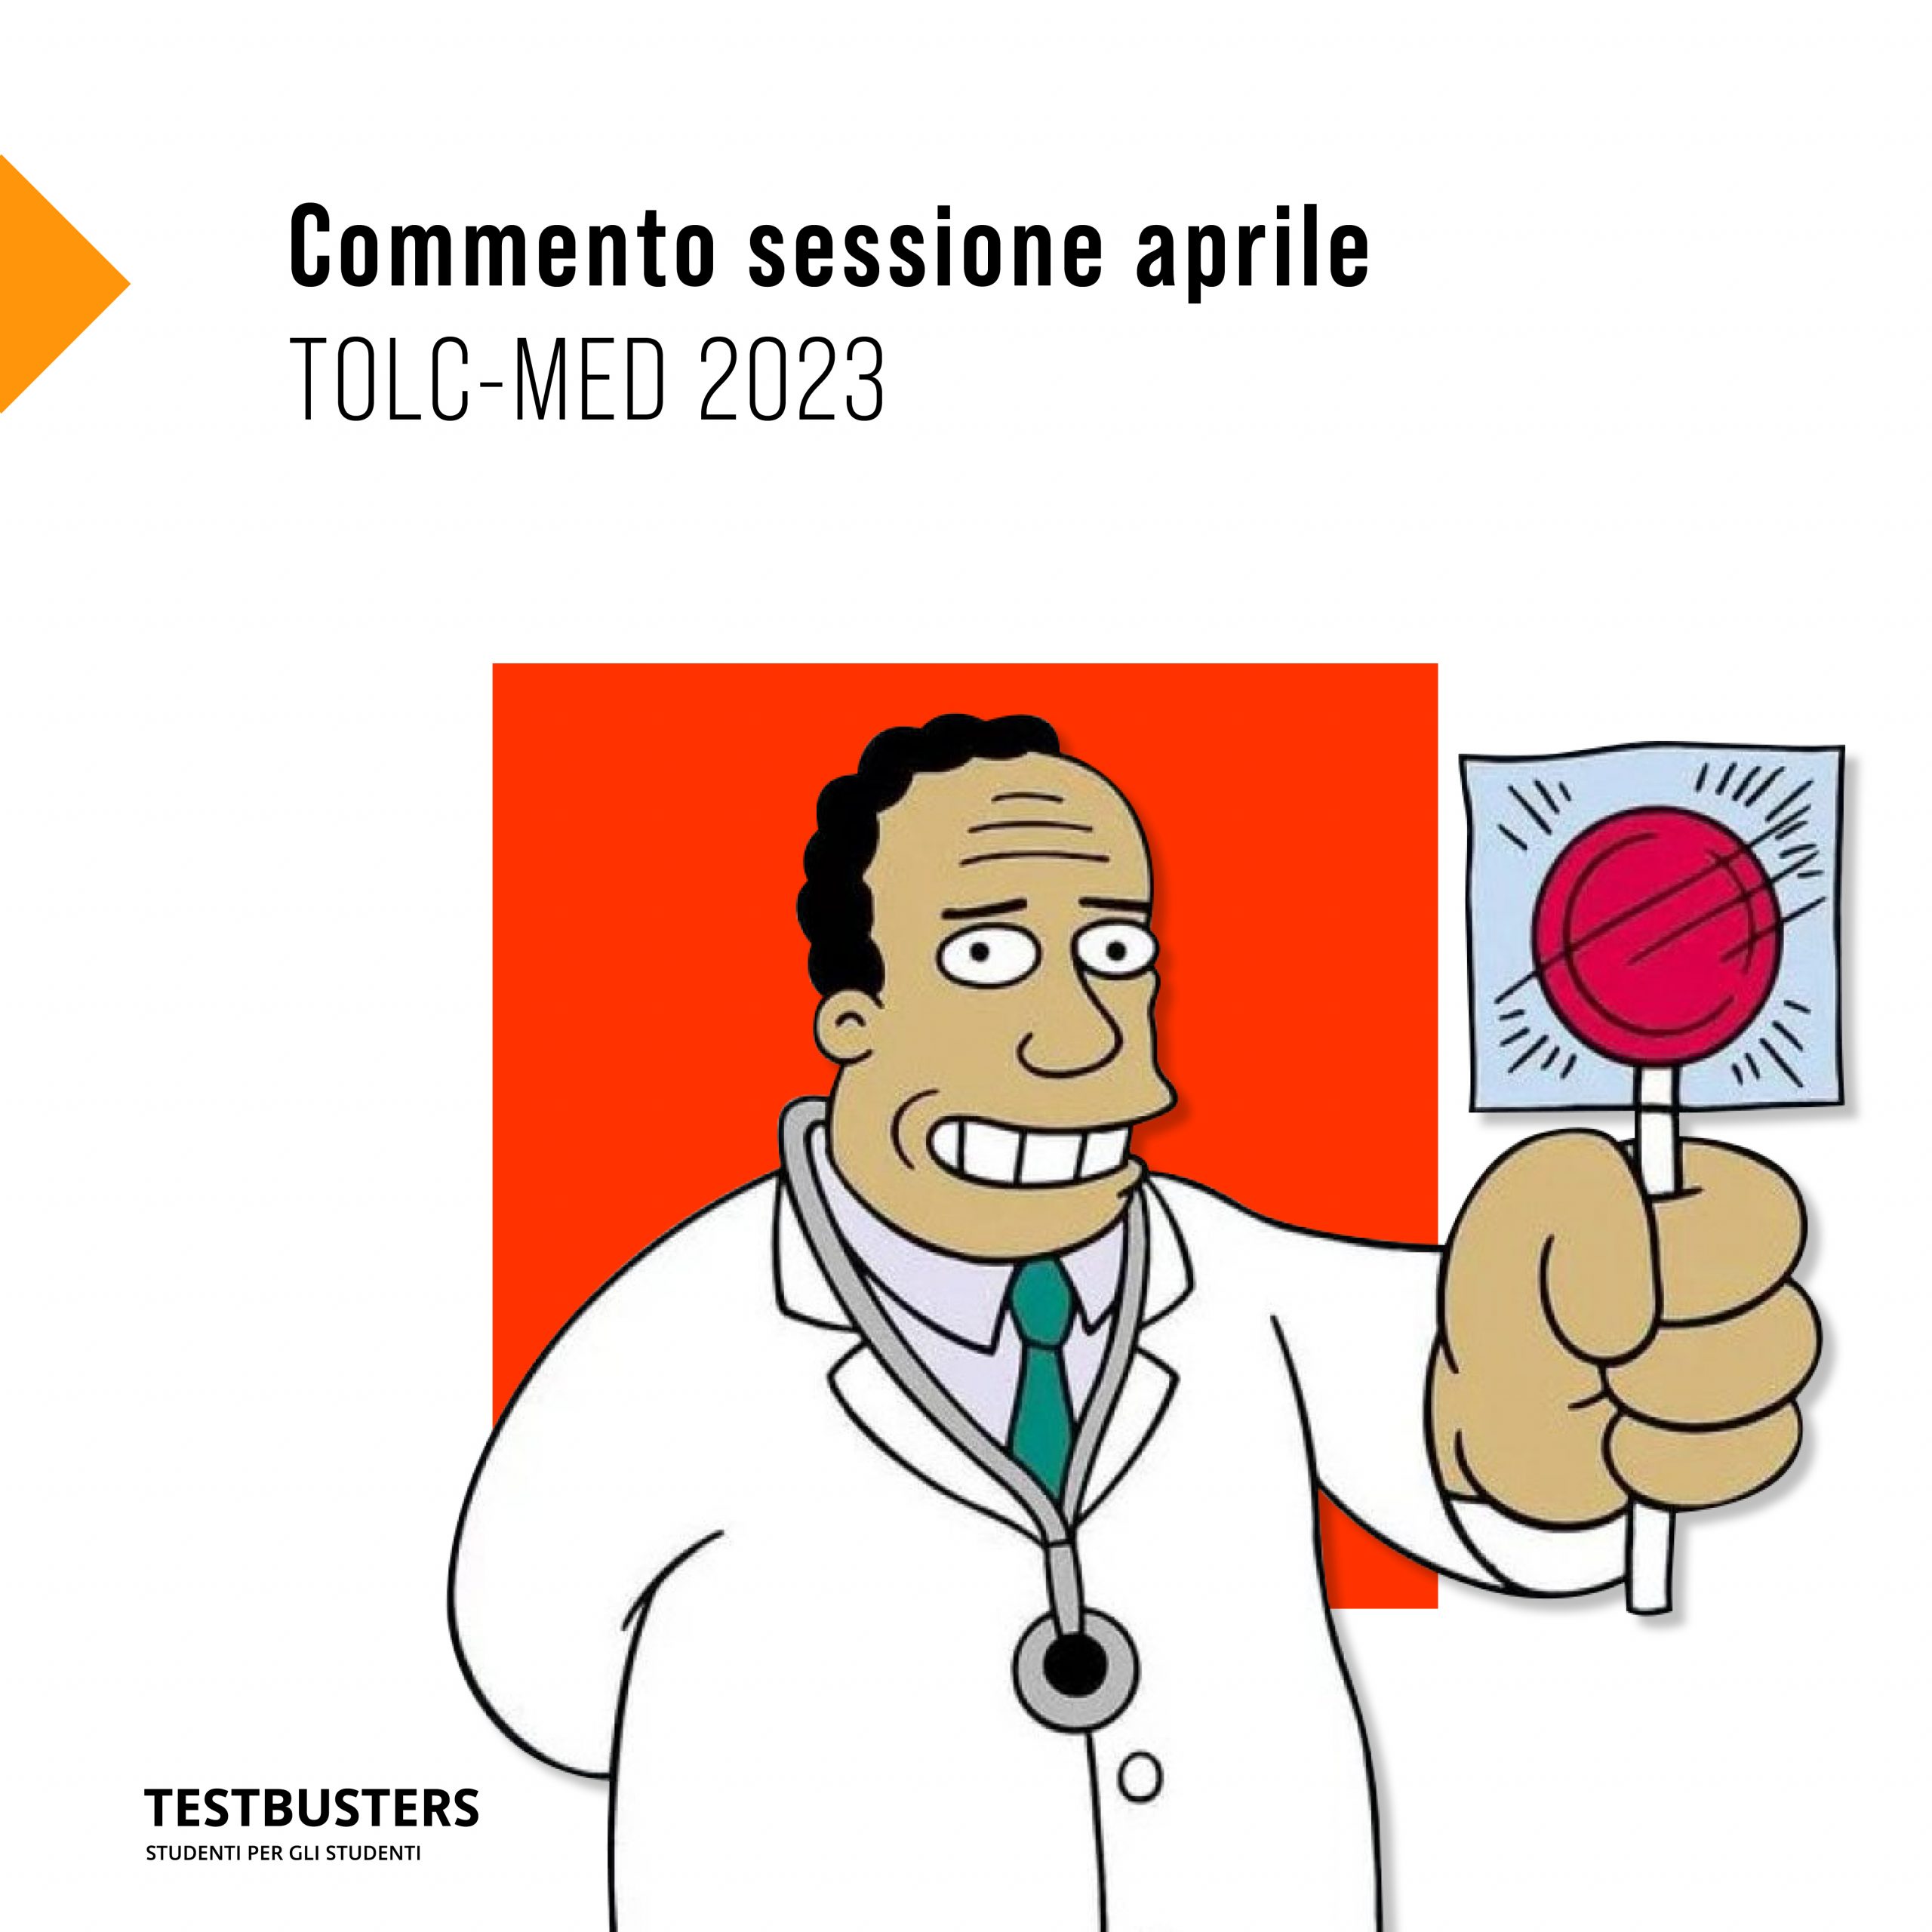 Commento sessione aprile tolc med 2023